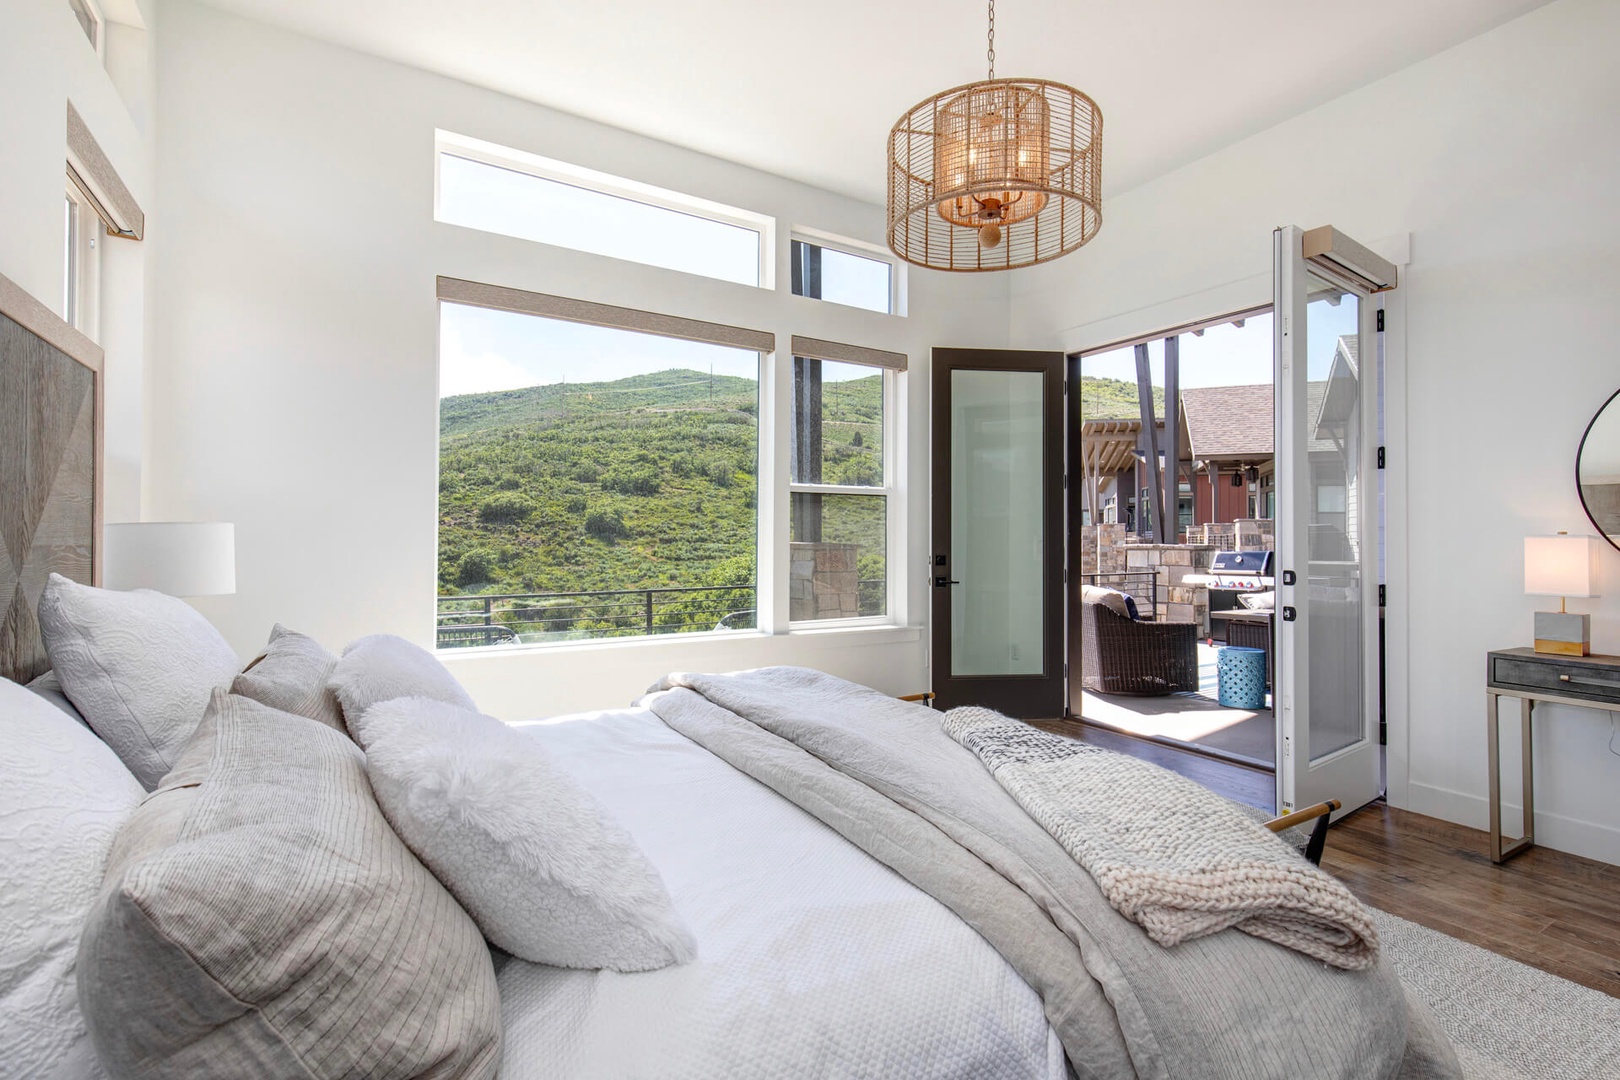 Main Level KING Master Bedroom Suite with Patio Access - Incredible Views!